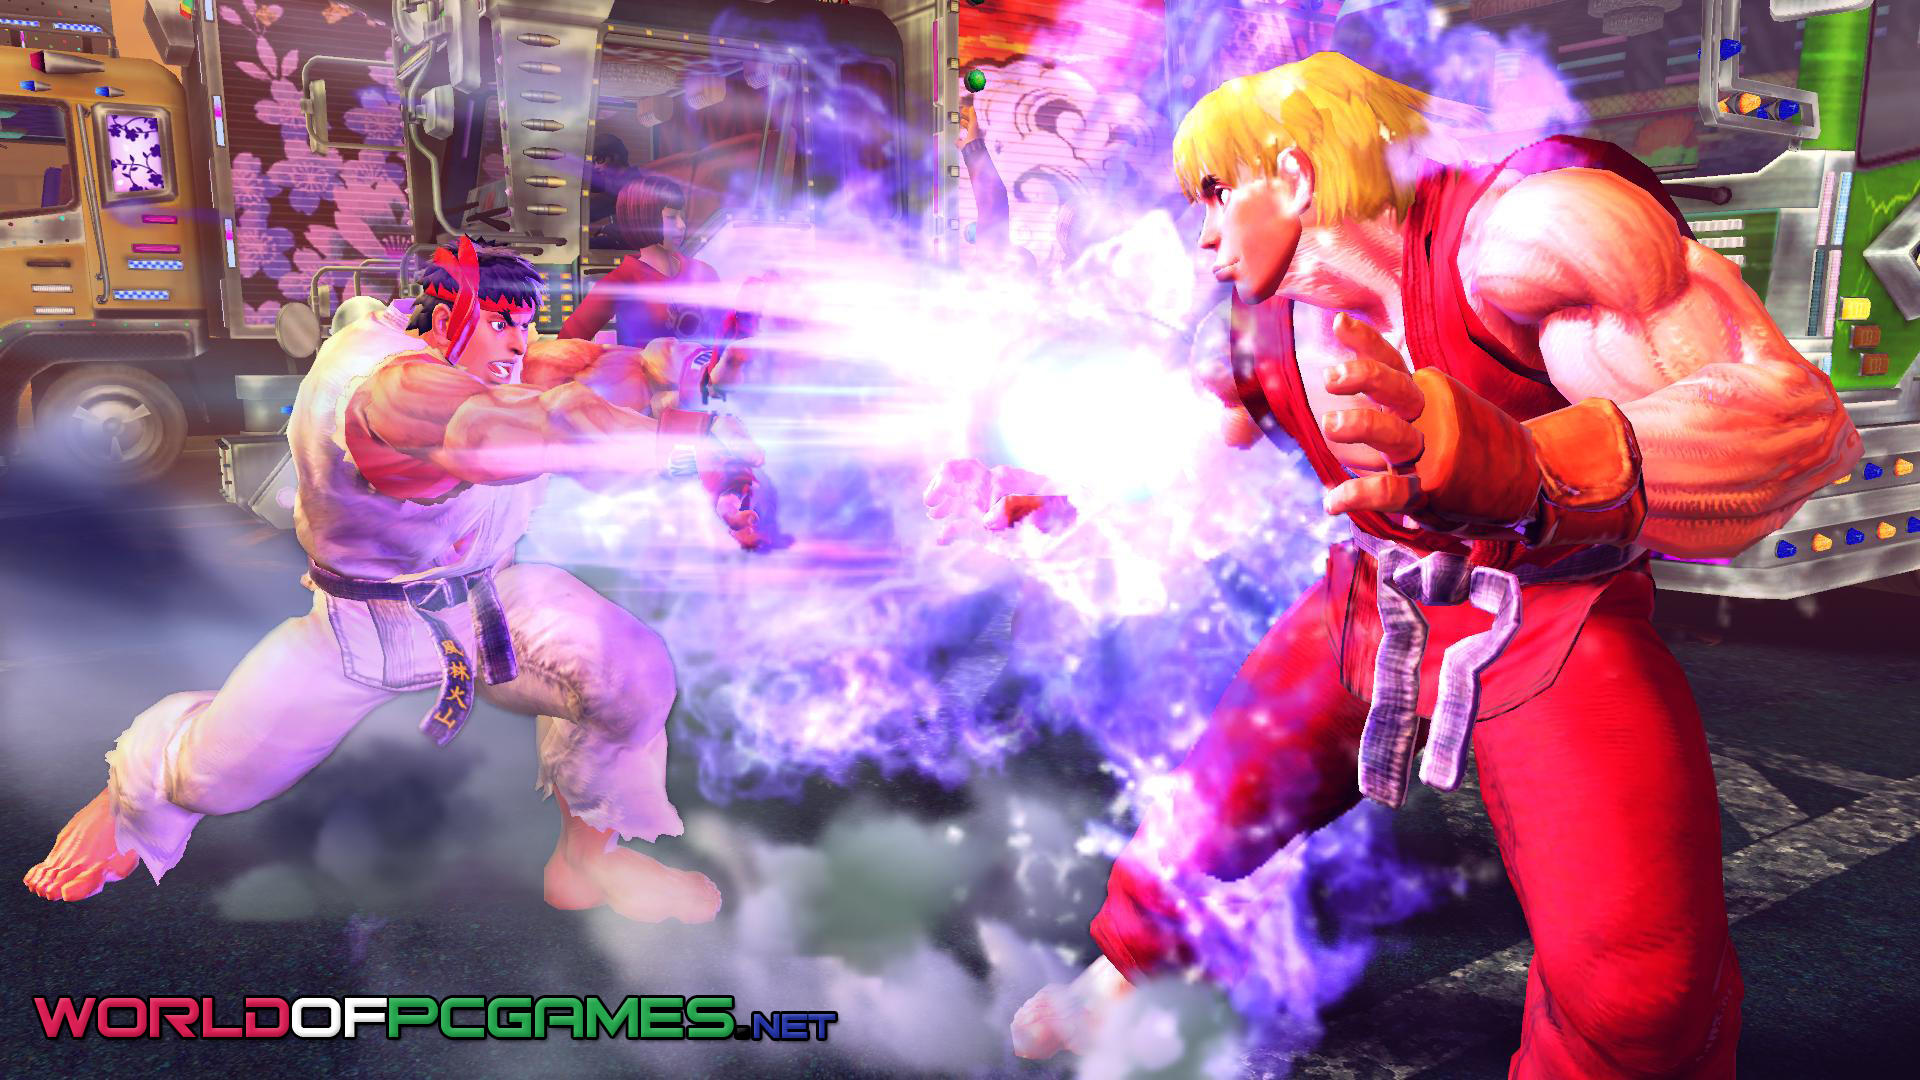 Street Fighter V Arcade Edition Free Download PC Game By worldof-pcgames.netm